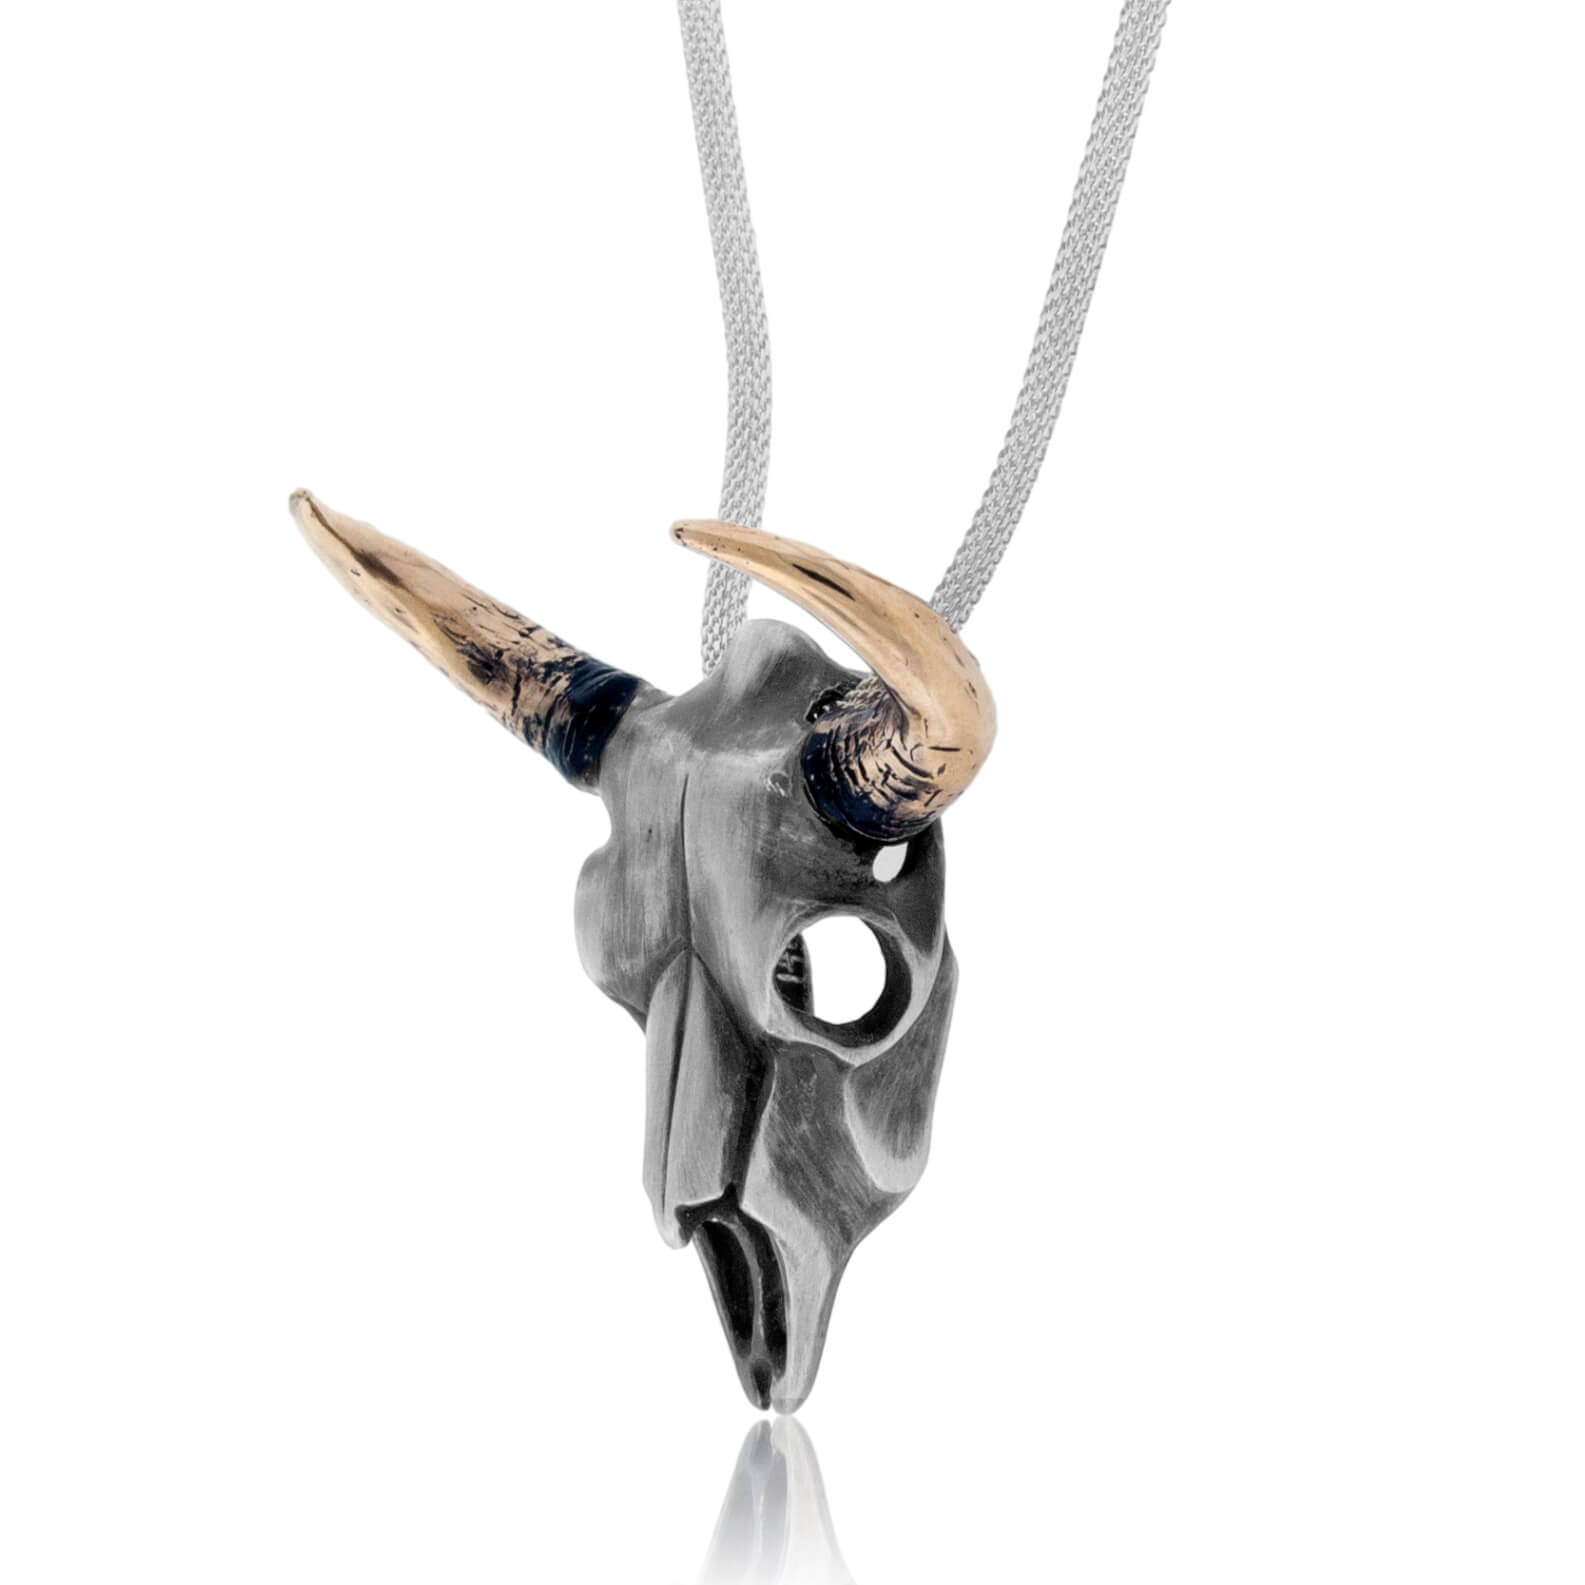 Bat Skull Necklace in Silver by Lost Apostle